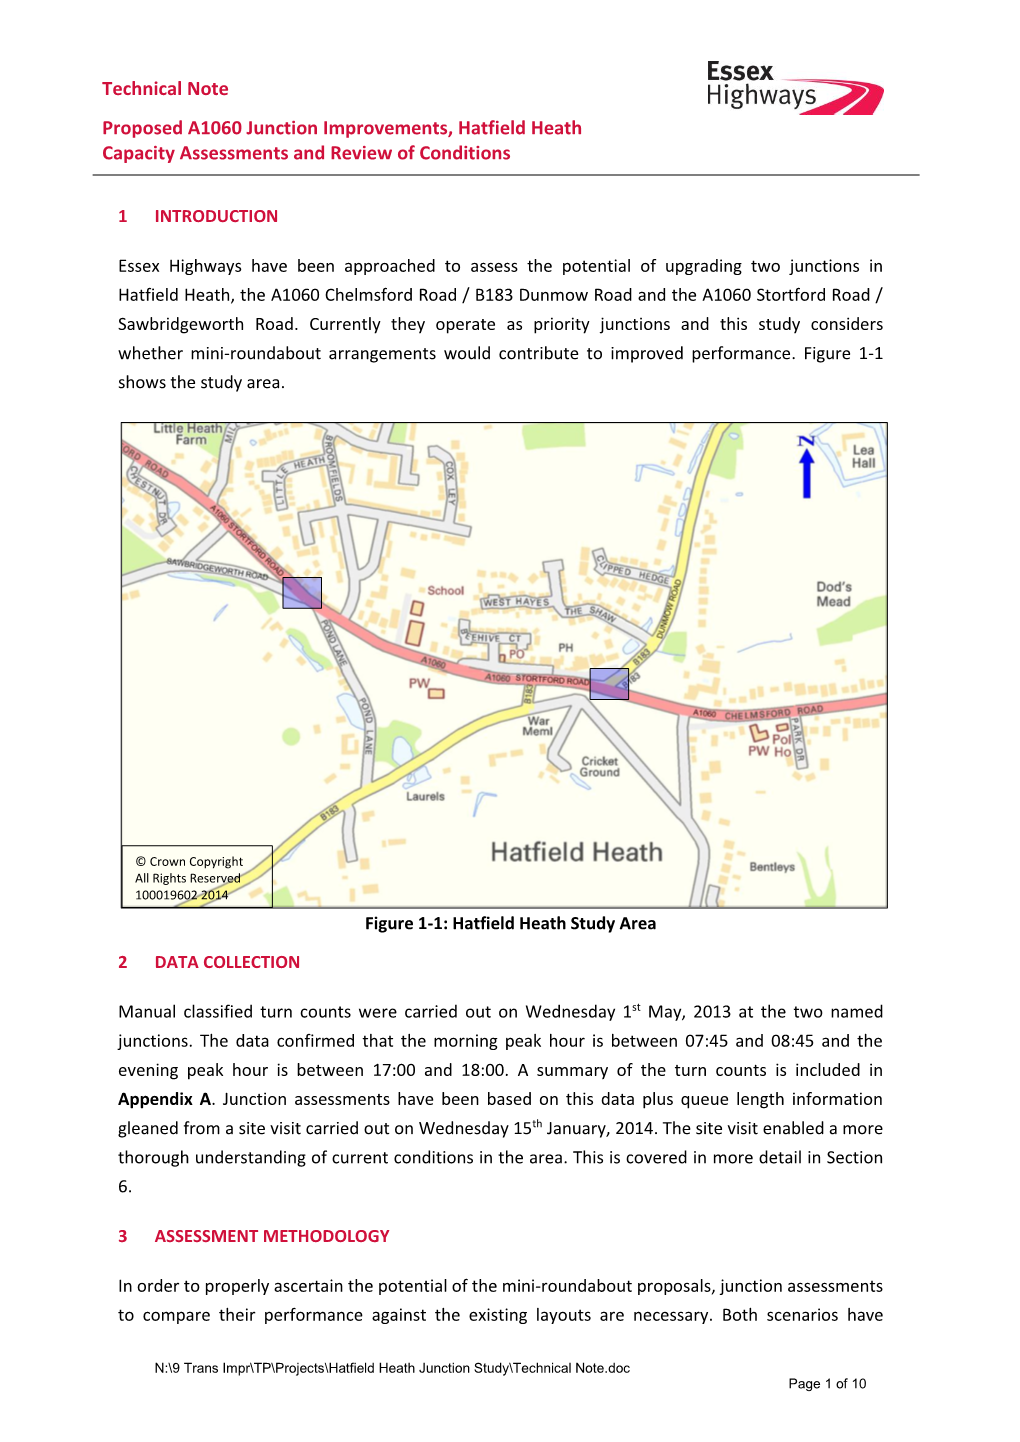 Technical Note Proposed A1060 Junction Improvements, Hatfield